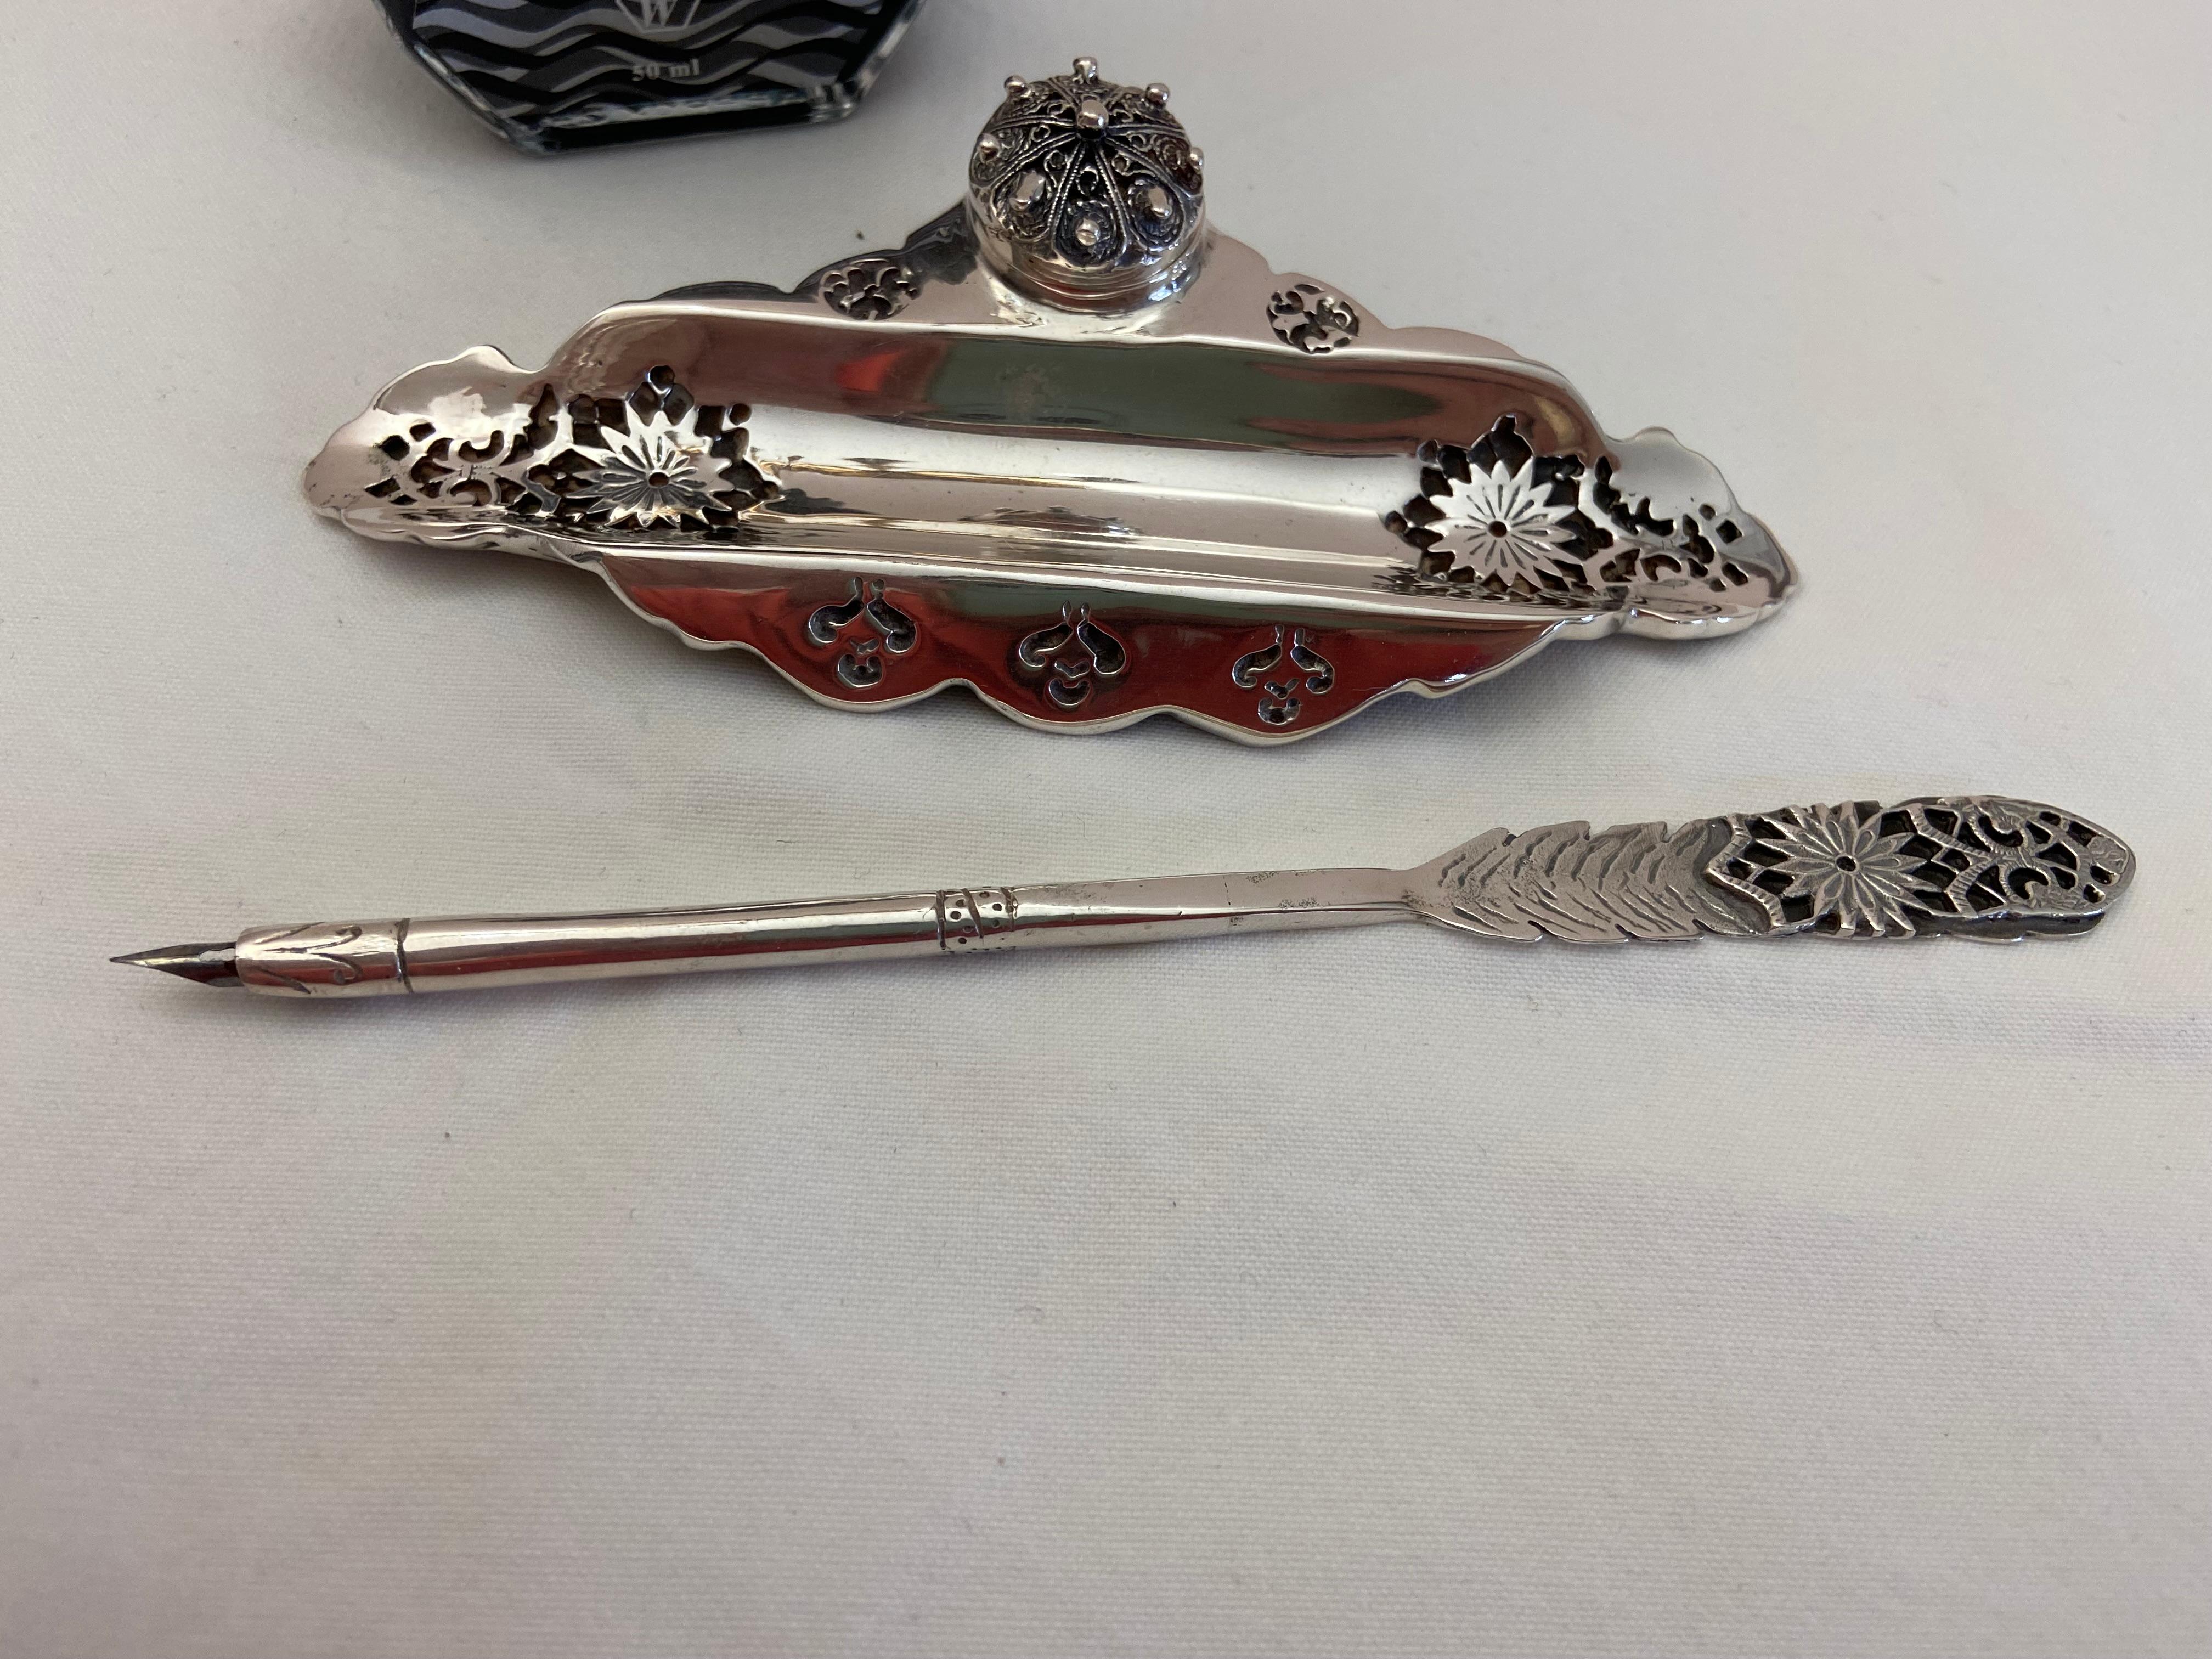 Inkwell and Fountain Pen, 800 Silver.
Elegant Set, in 800 silver, total weight 225 grams (195 gr inkwell and 30 pen).
The pen measures 16 cm, the inkwell 14 cm .